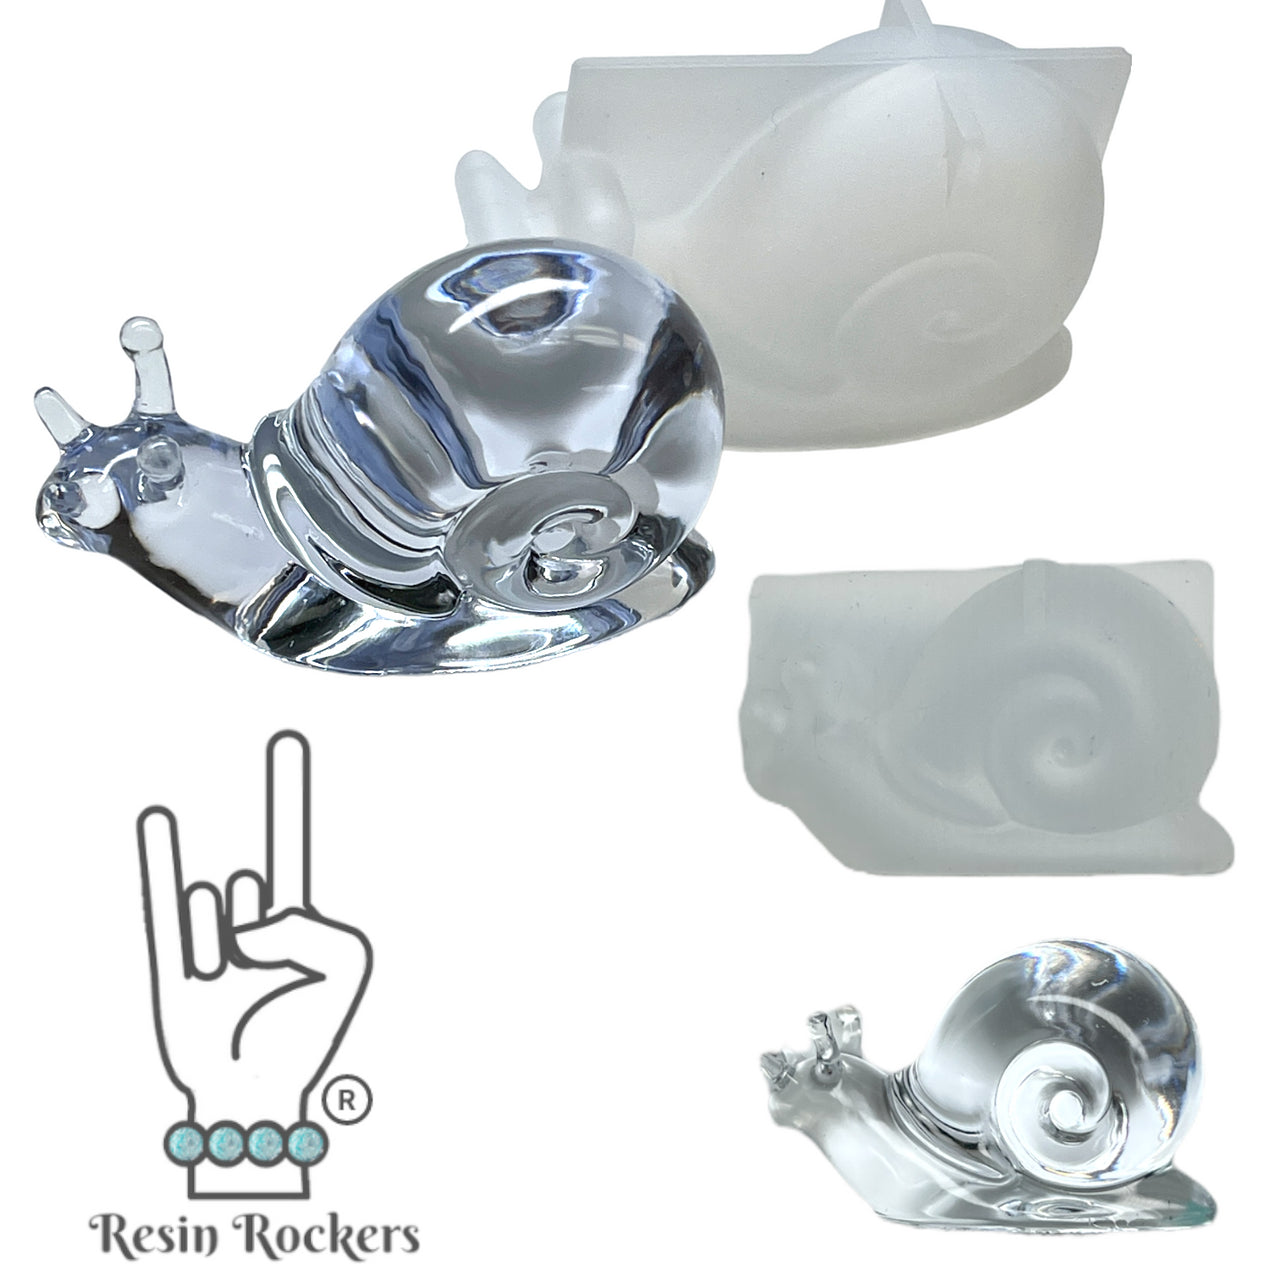 Resin Rockers Get Lucky Keychain Starter Kit - Makes 10 Keychains!